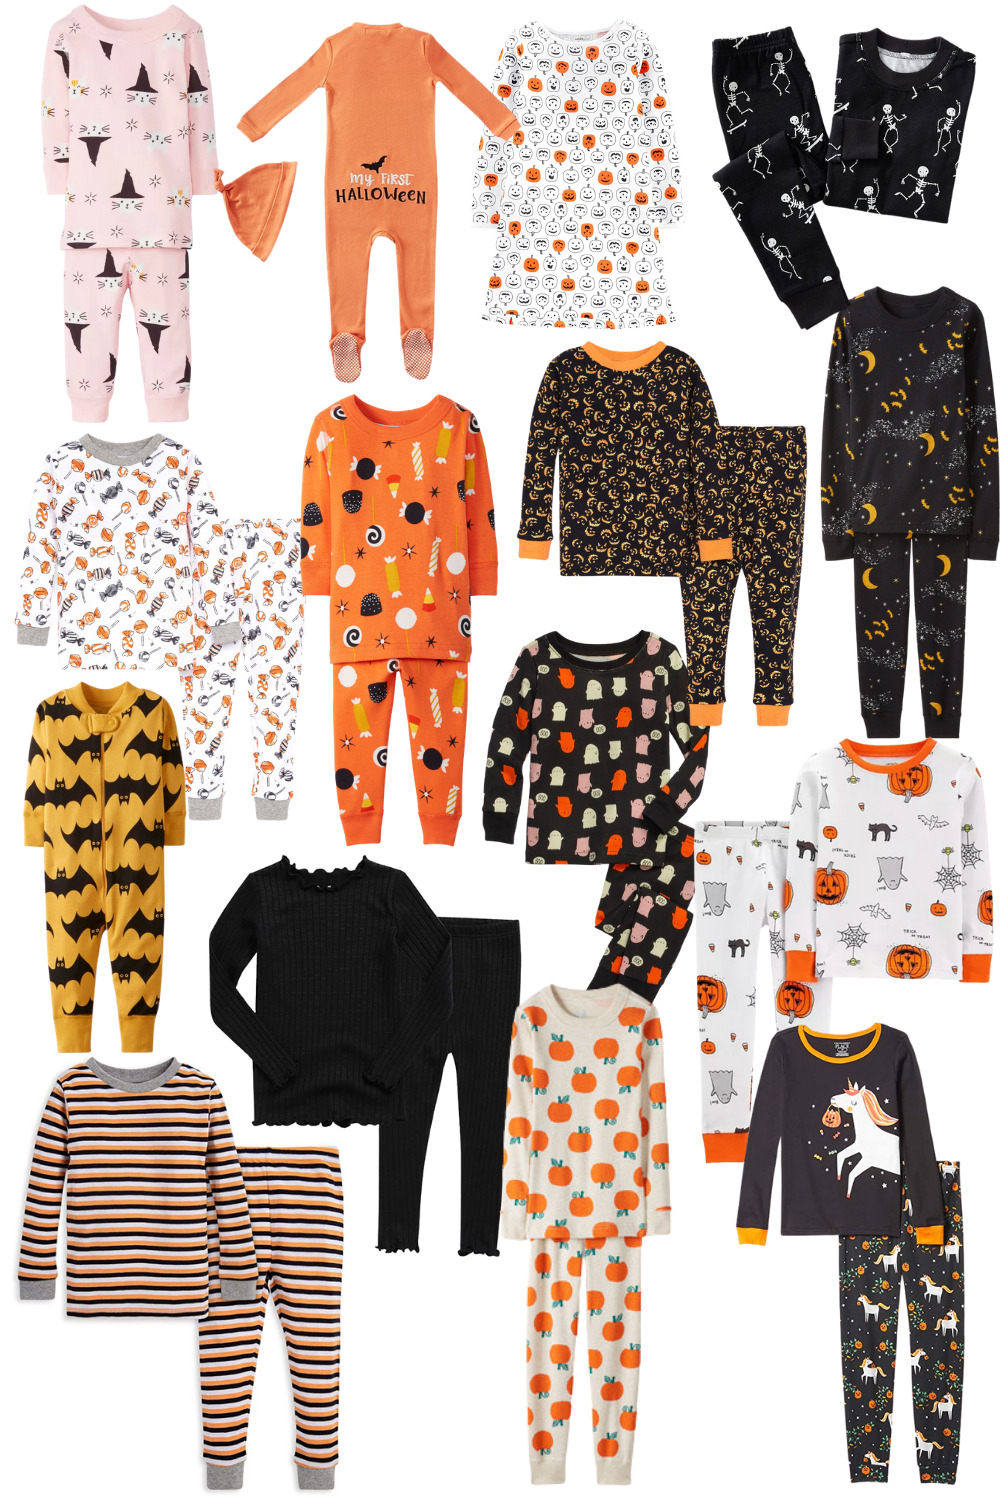 The Cutest Halloween Pajamas for Kids This Year